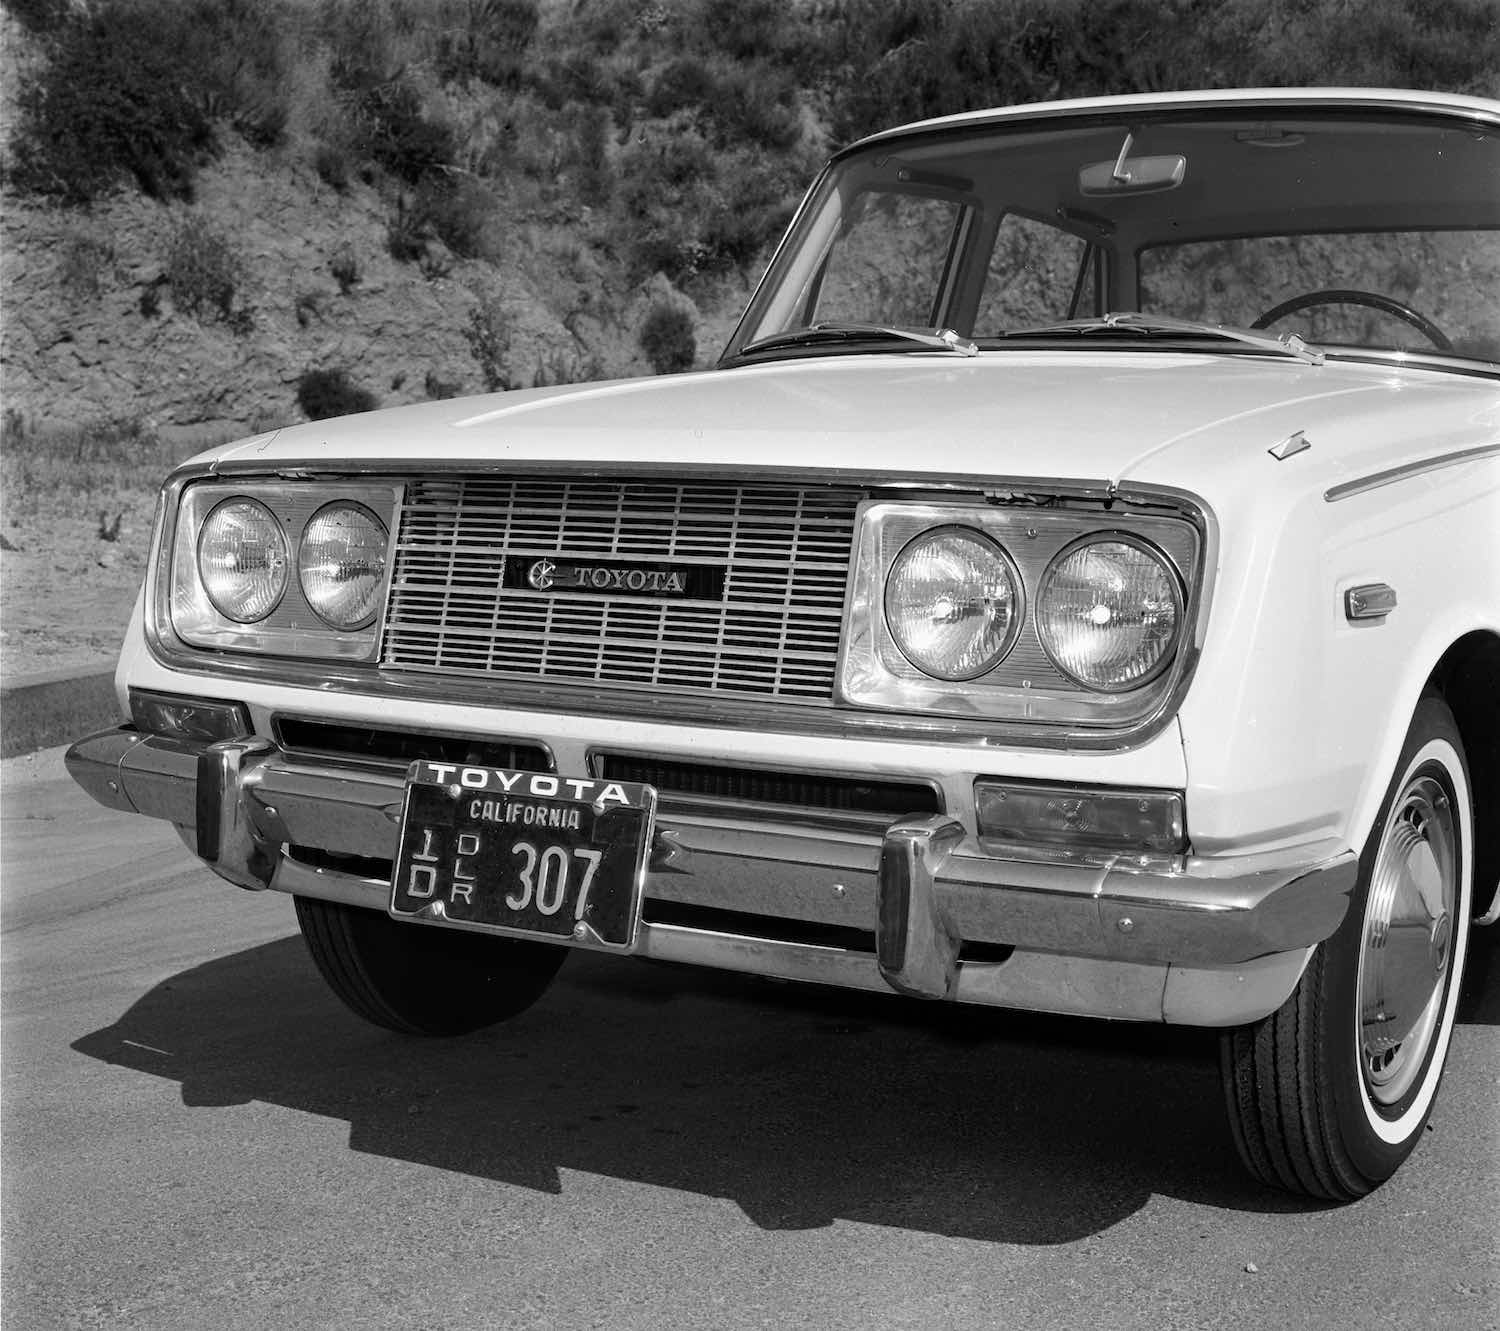 The Toyota logo in the grille of a 1966 Corona sedan.